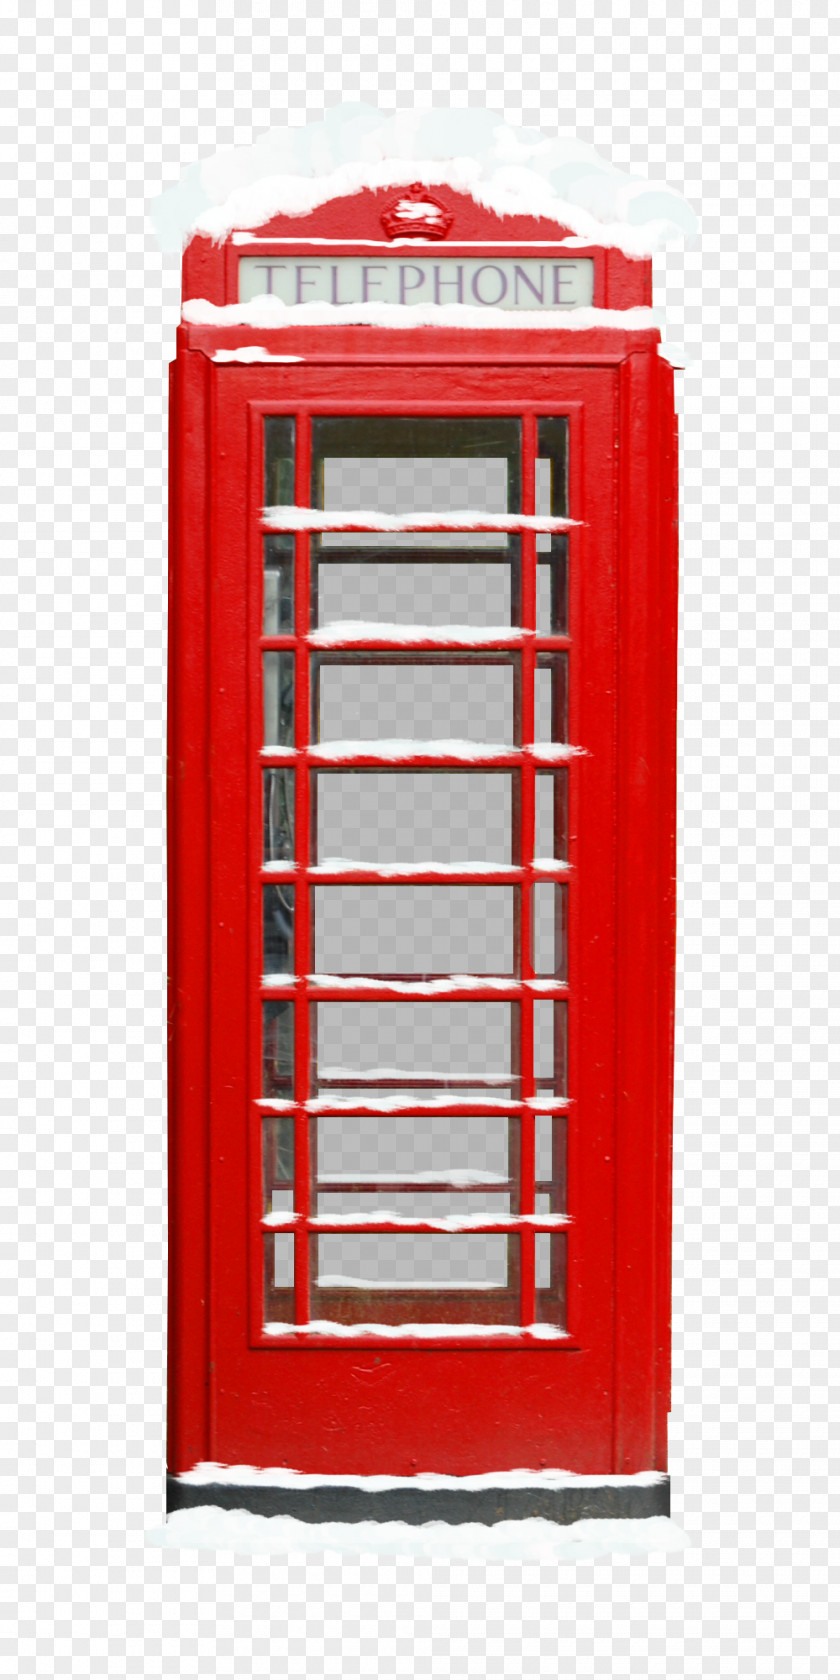 Telephone Booth Telephony PNG